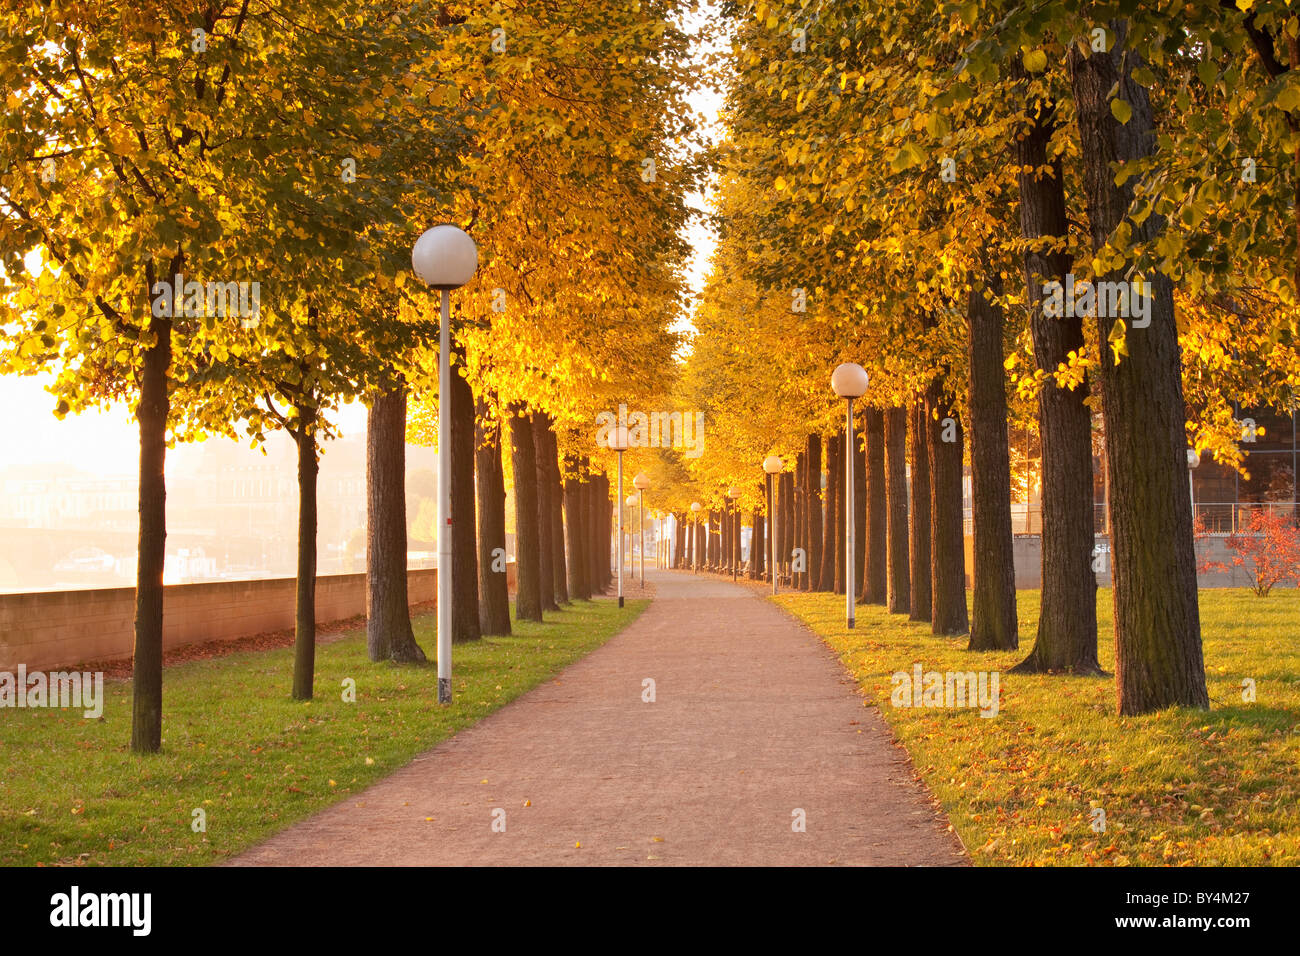 Germany,Saxony,Dresden,pathway lined with trees turning to autumn colors Stock Photo